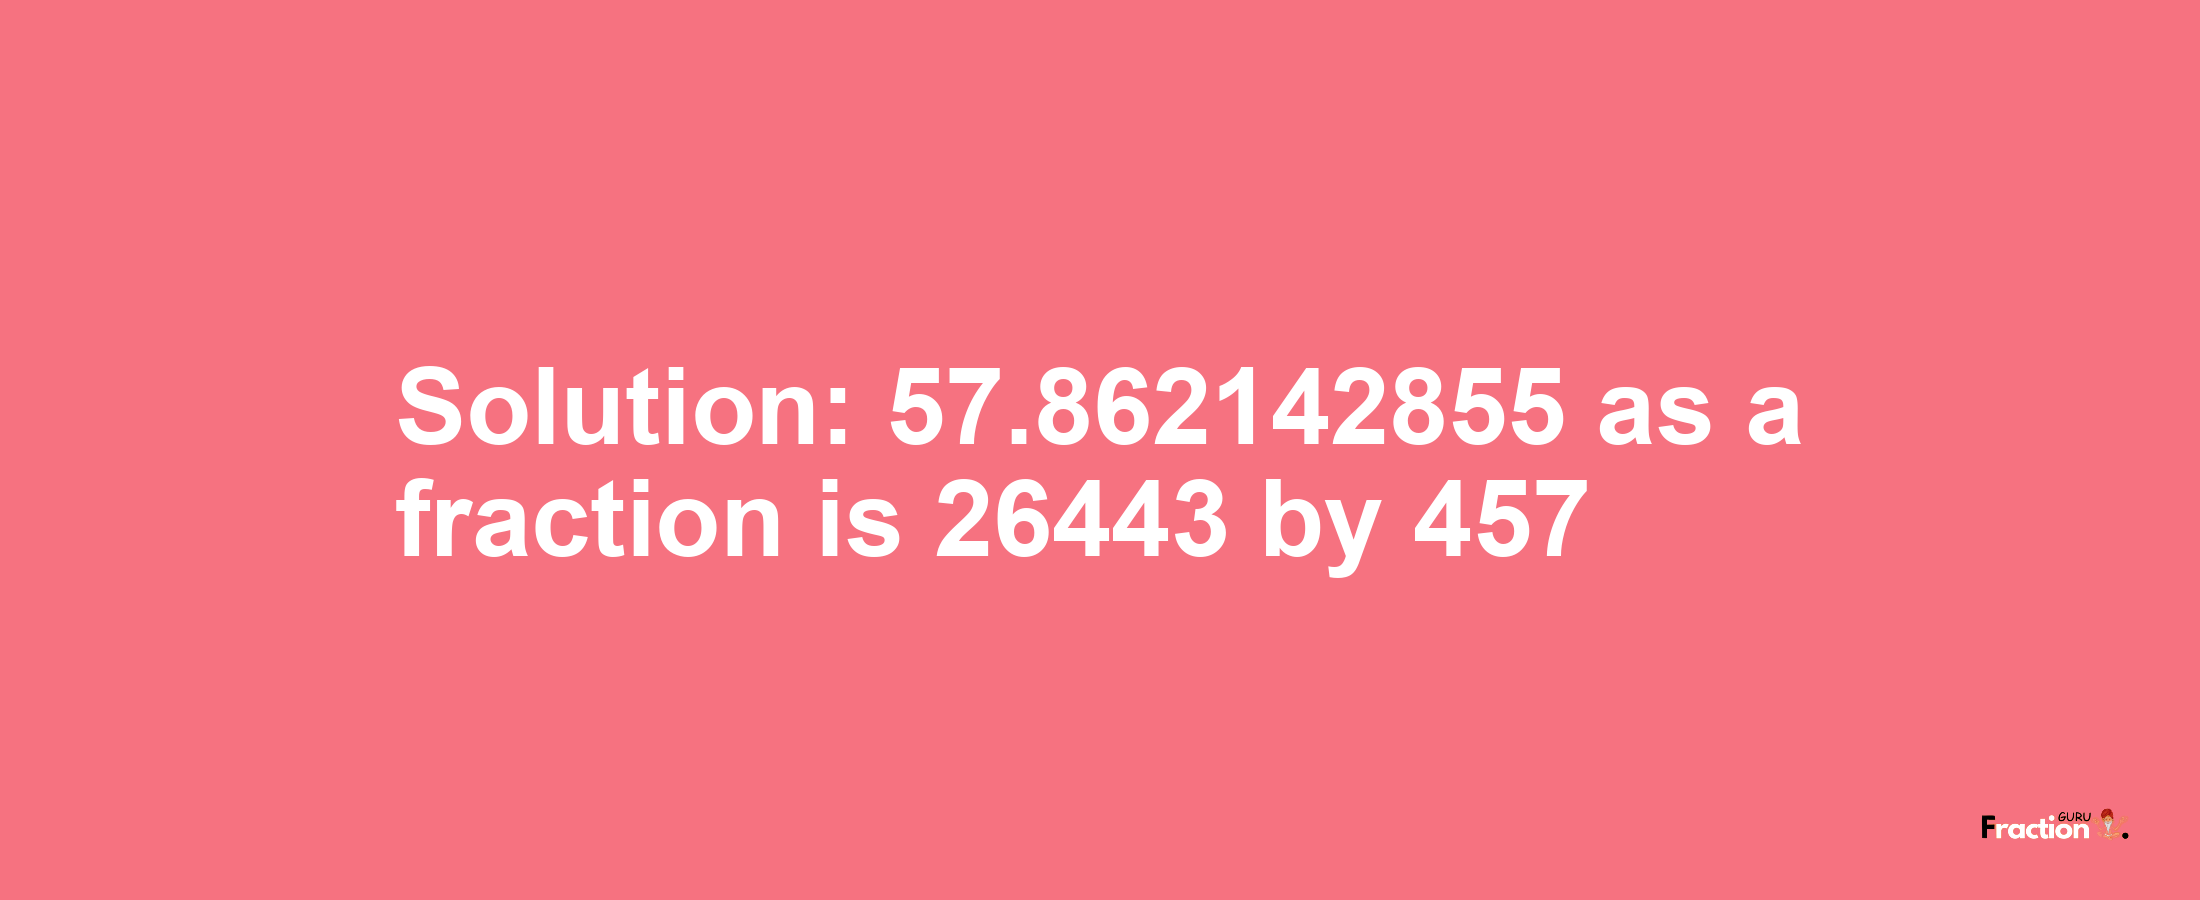 Solution:57.862142855 as a fraction is 26443/457